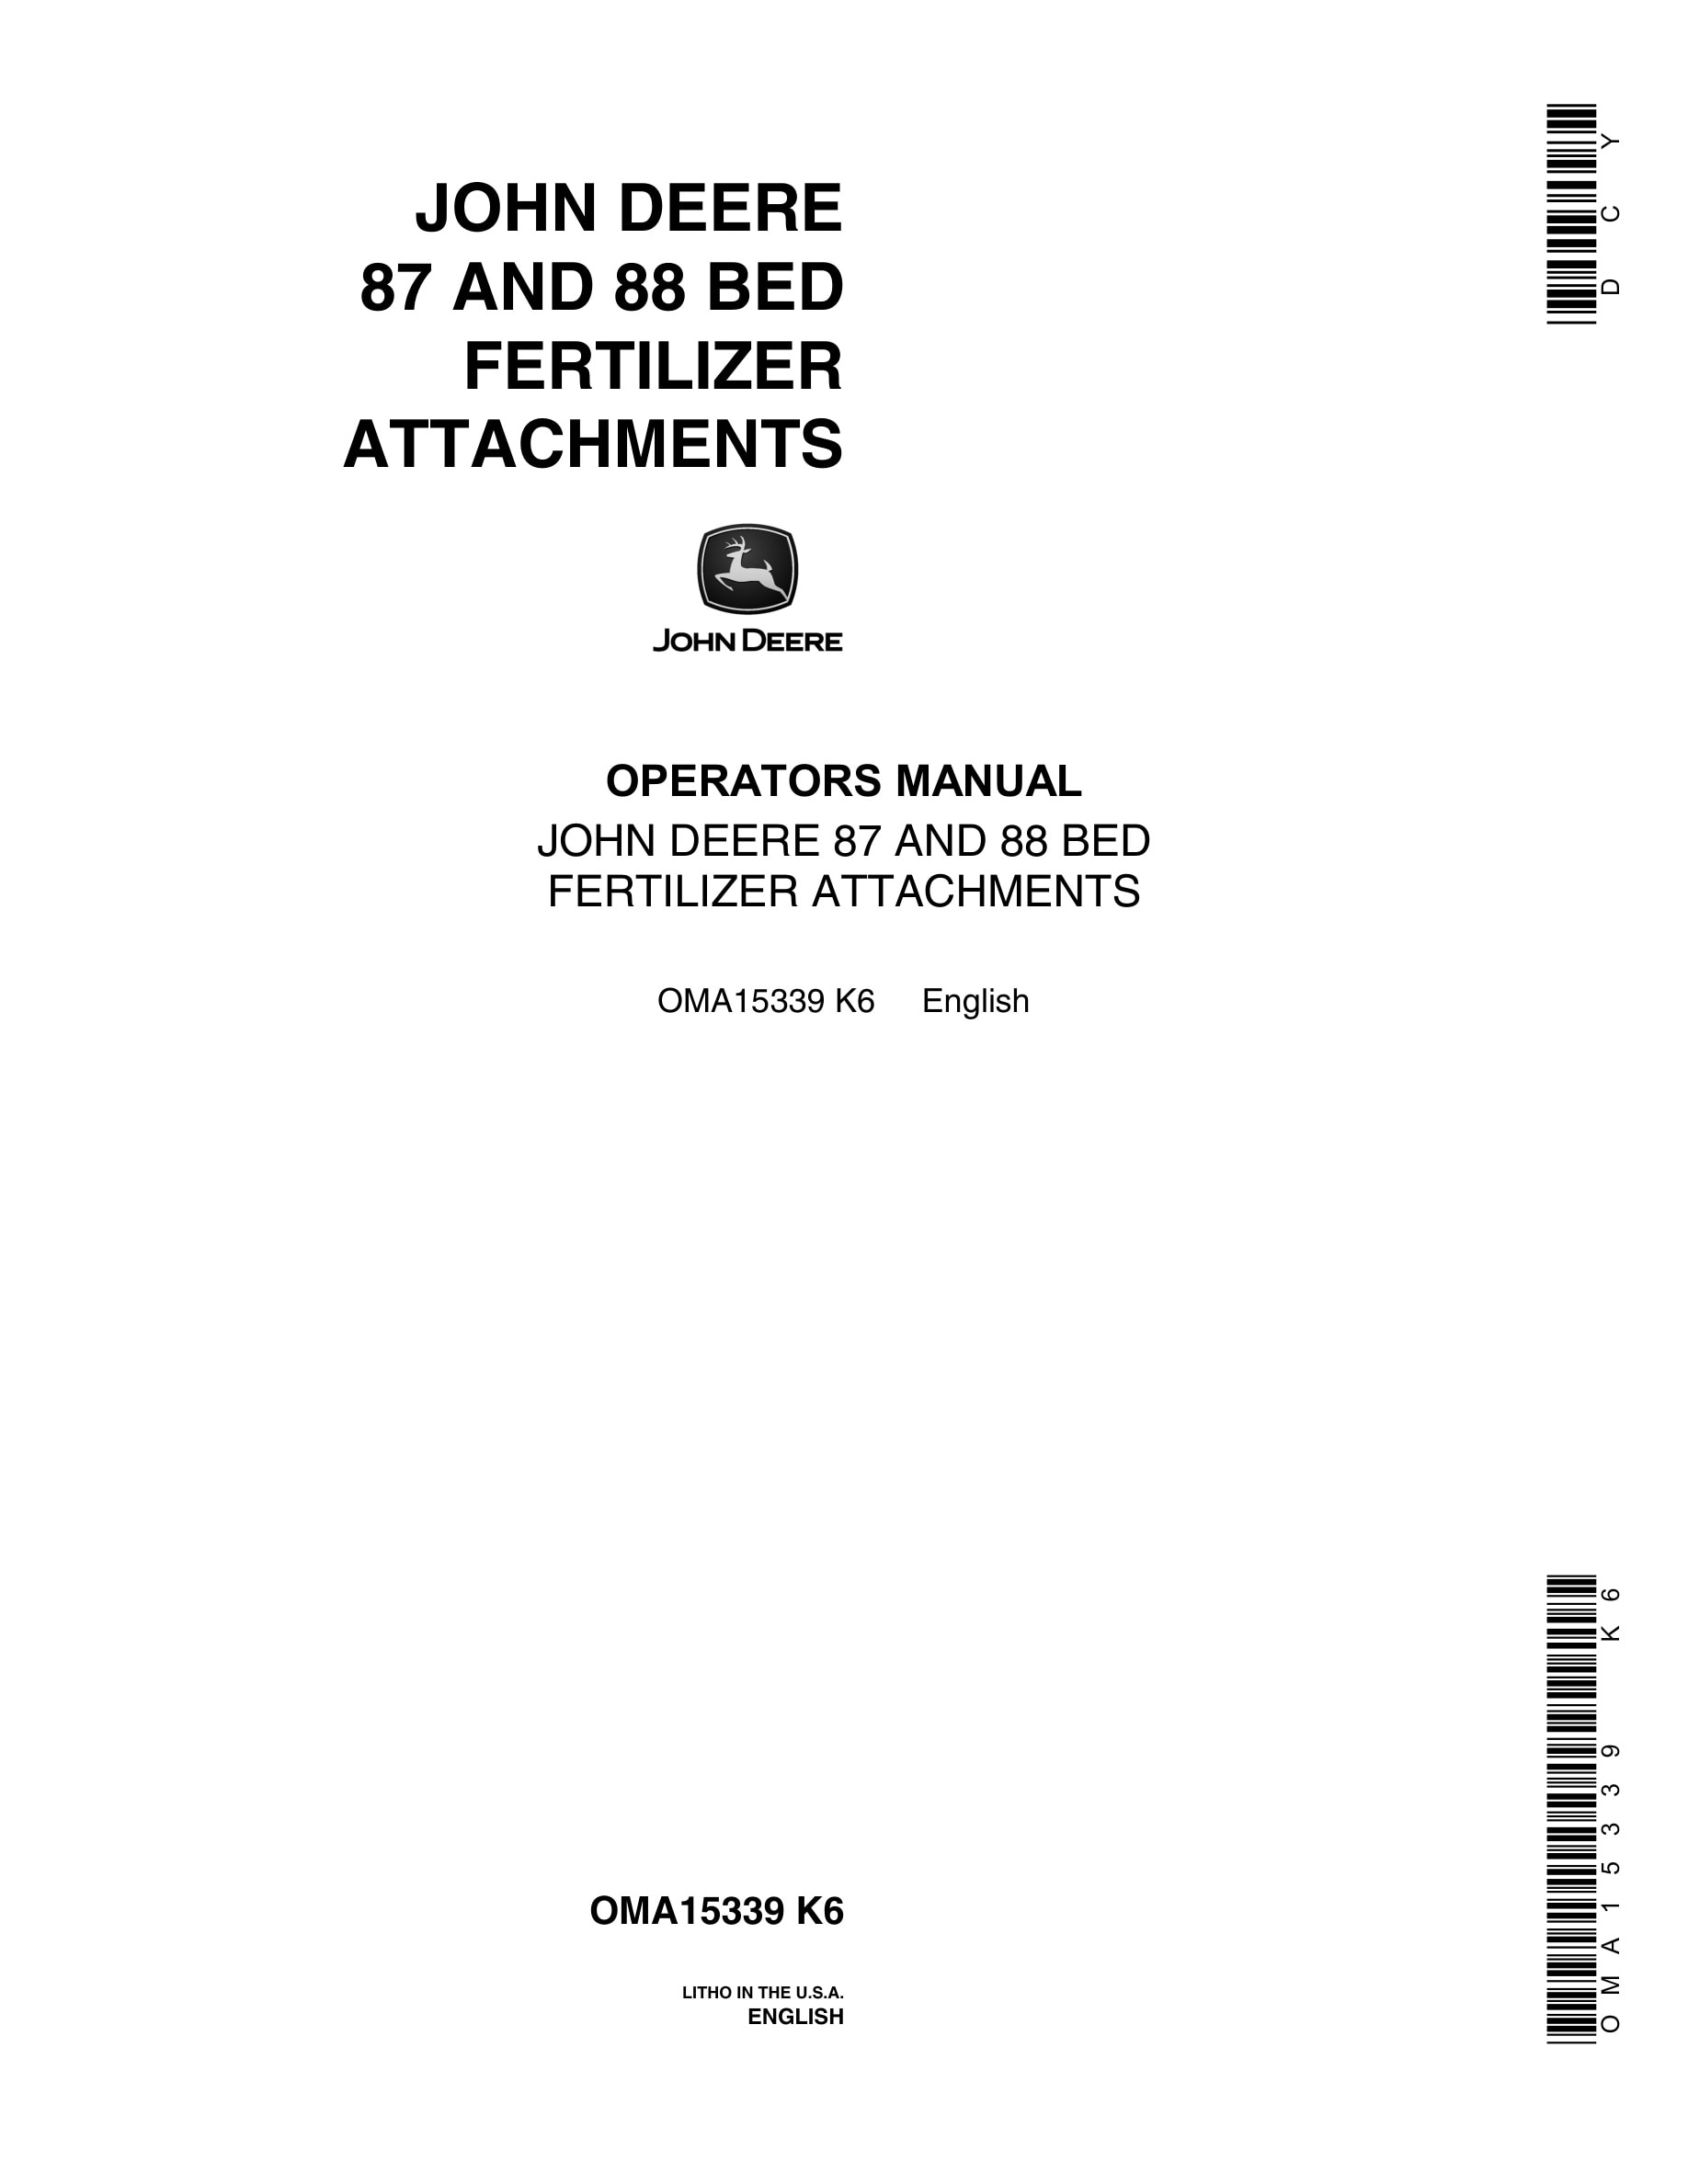 John Deere 87 AND 88 BED FERTILIZER ATTACHMENTS Operator Manual OMA15339-1